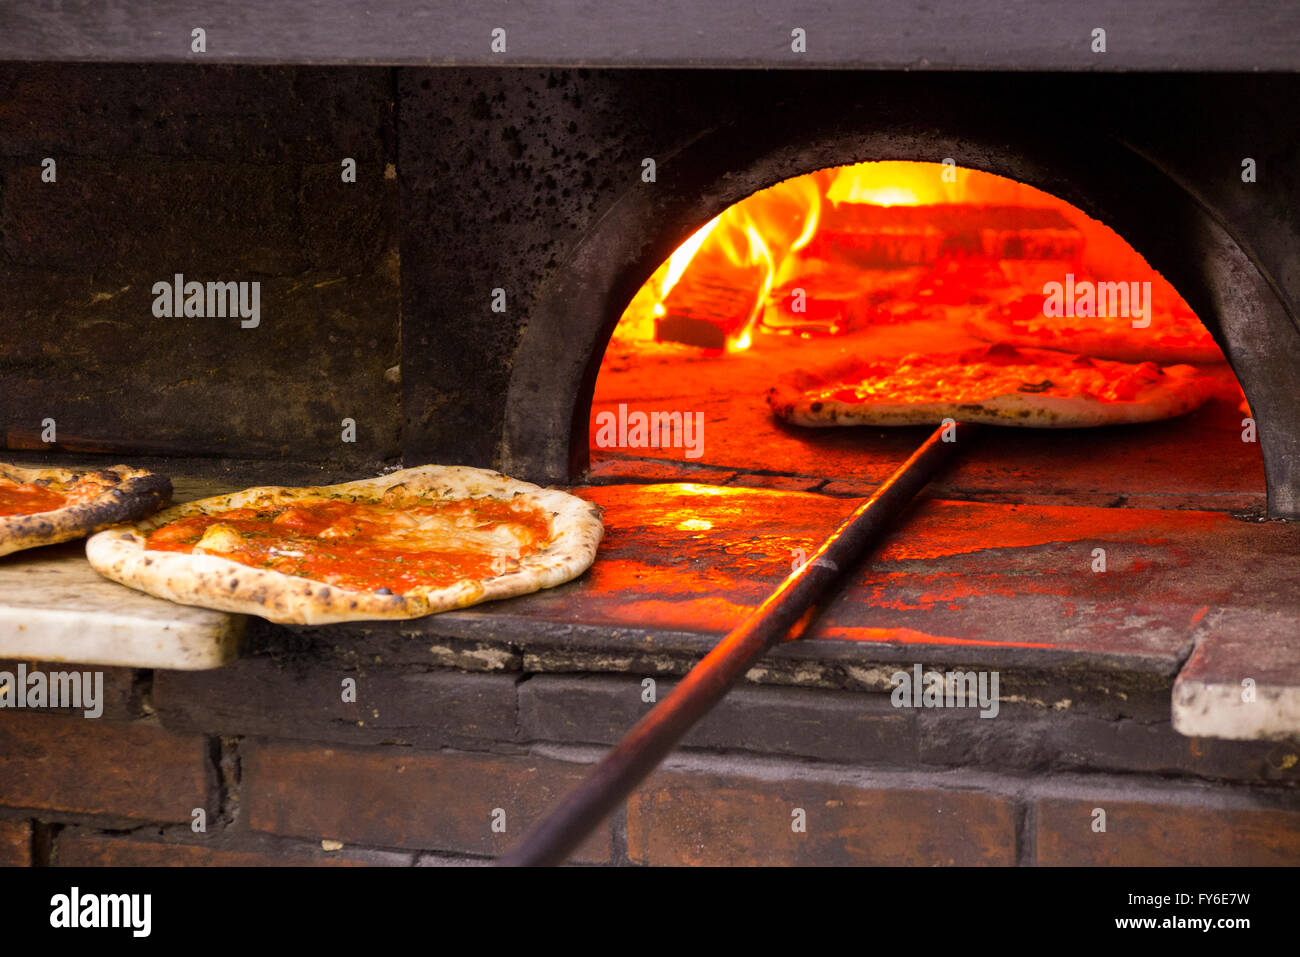 https://c8.alamy.com/comp/FY6E7W/looking-inside-a-wood-burning-pizza-oven-at-pizzas-being-baked-in-FY6E7W.jpg